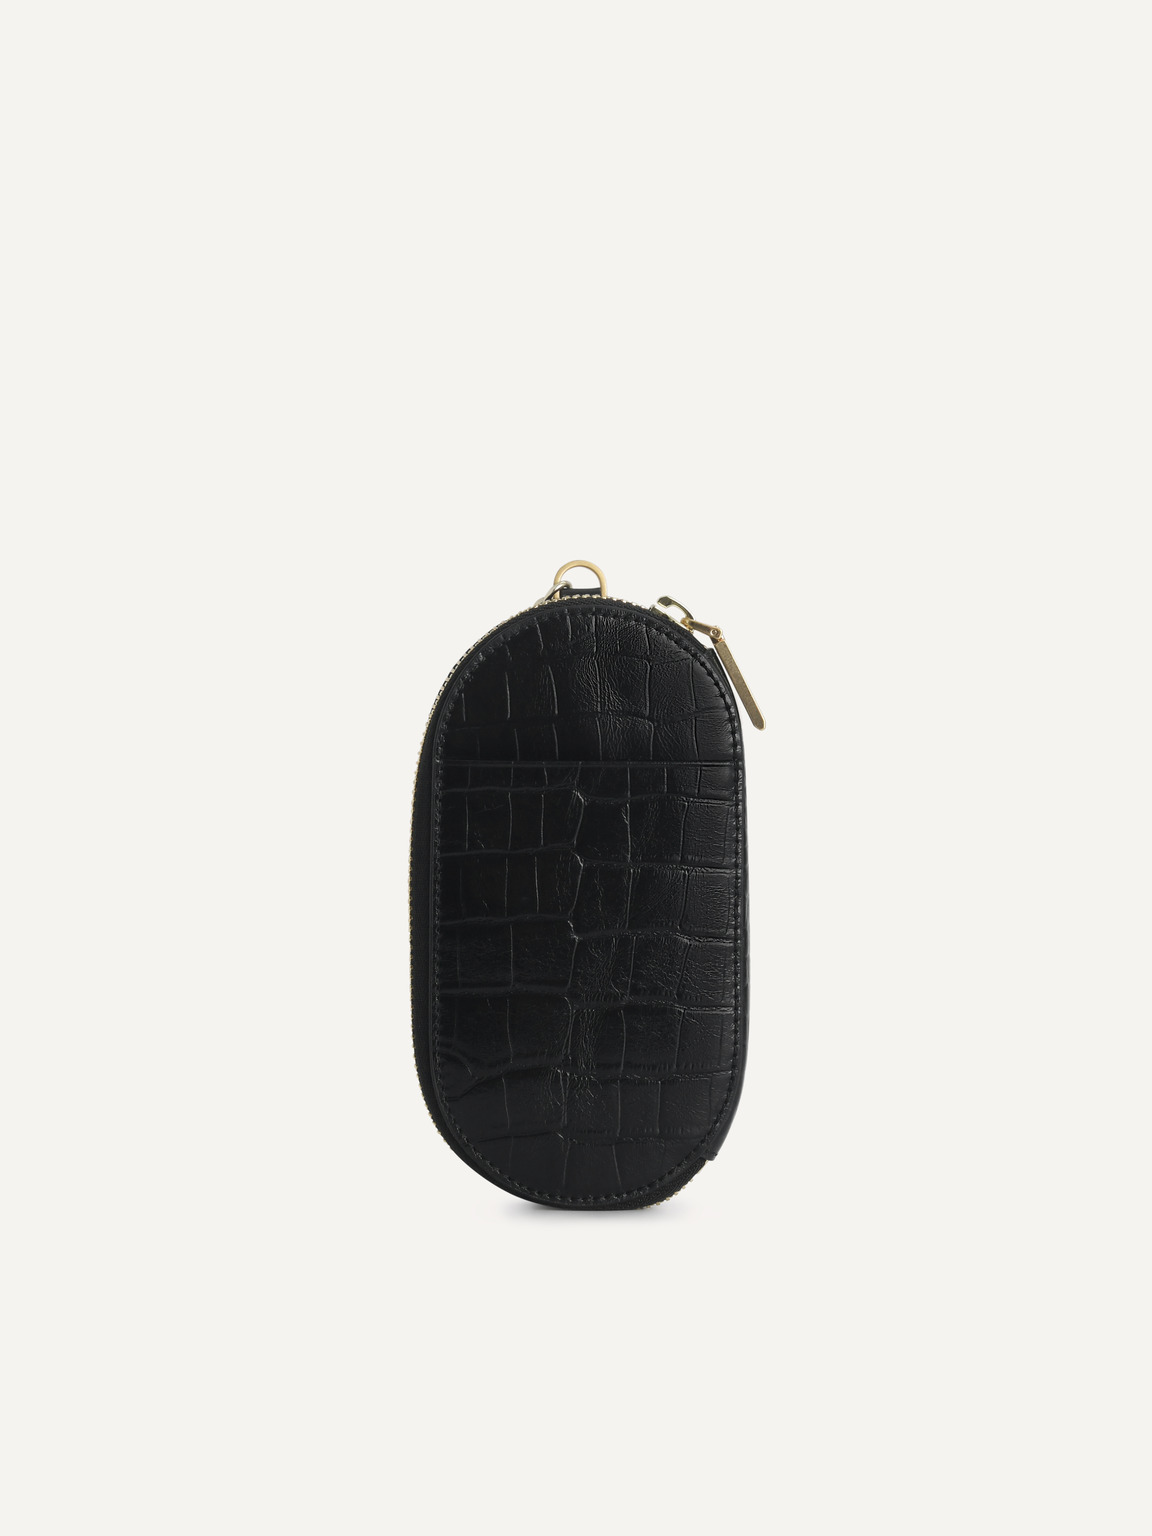 Textured Leather Pouch, Black